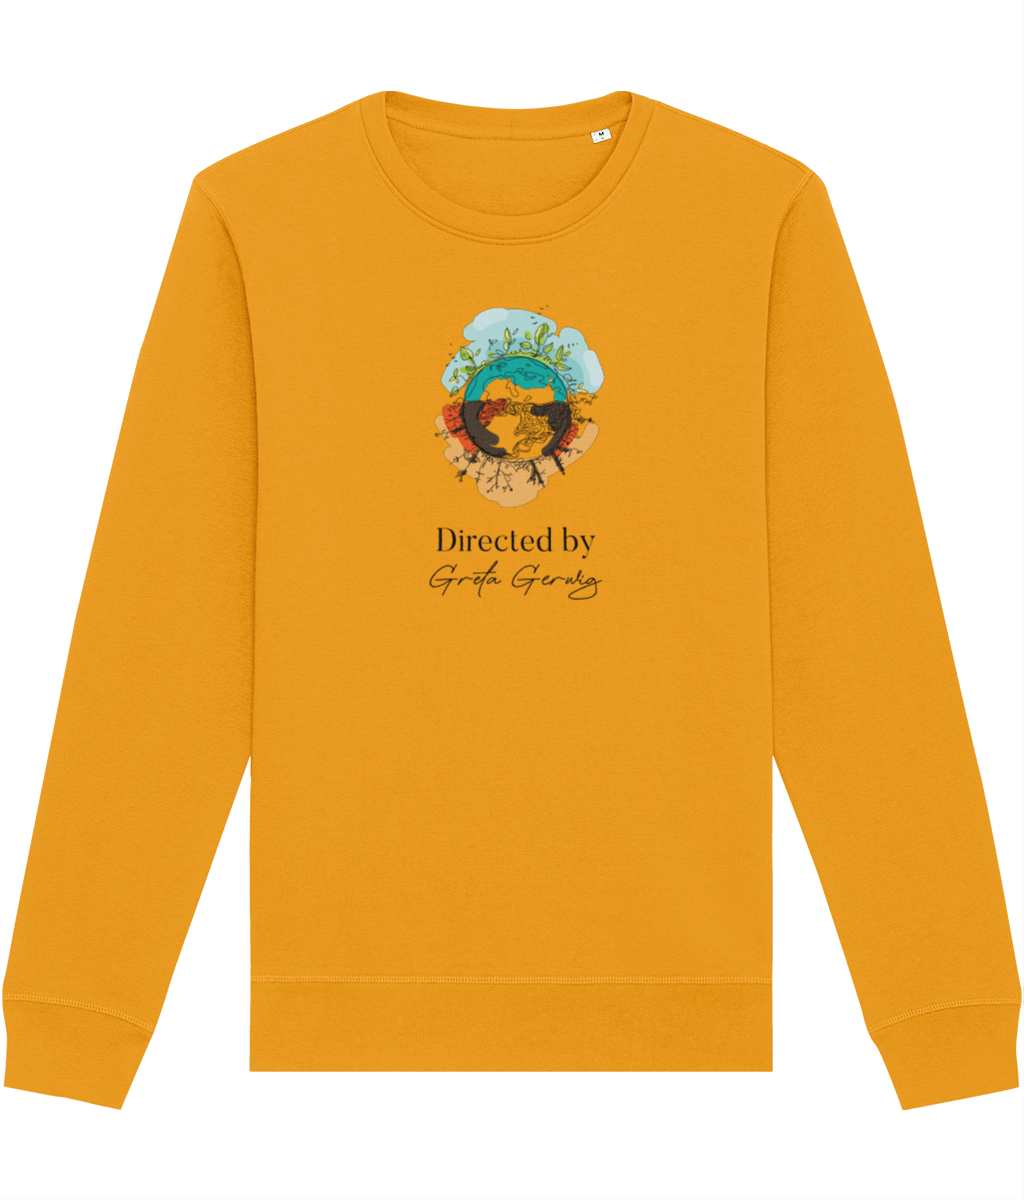 Climate Change 'Directed by Greta Gerwig' Organic Cotton Sweatshirt - Directed by Greta Gerwig